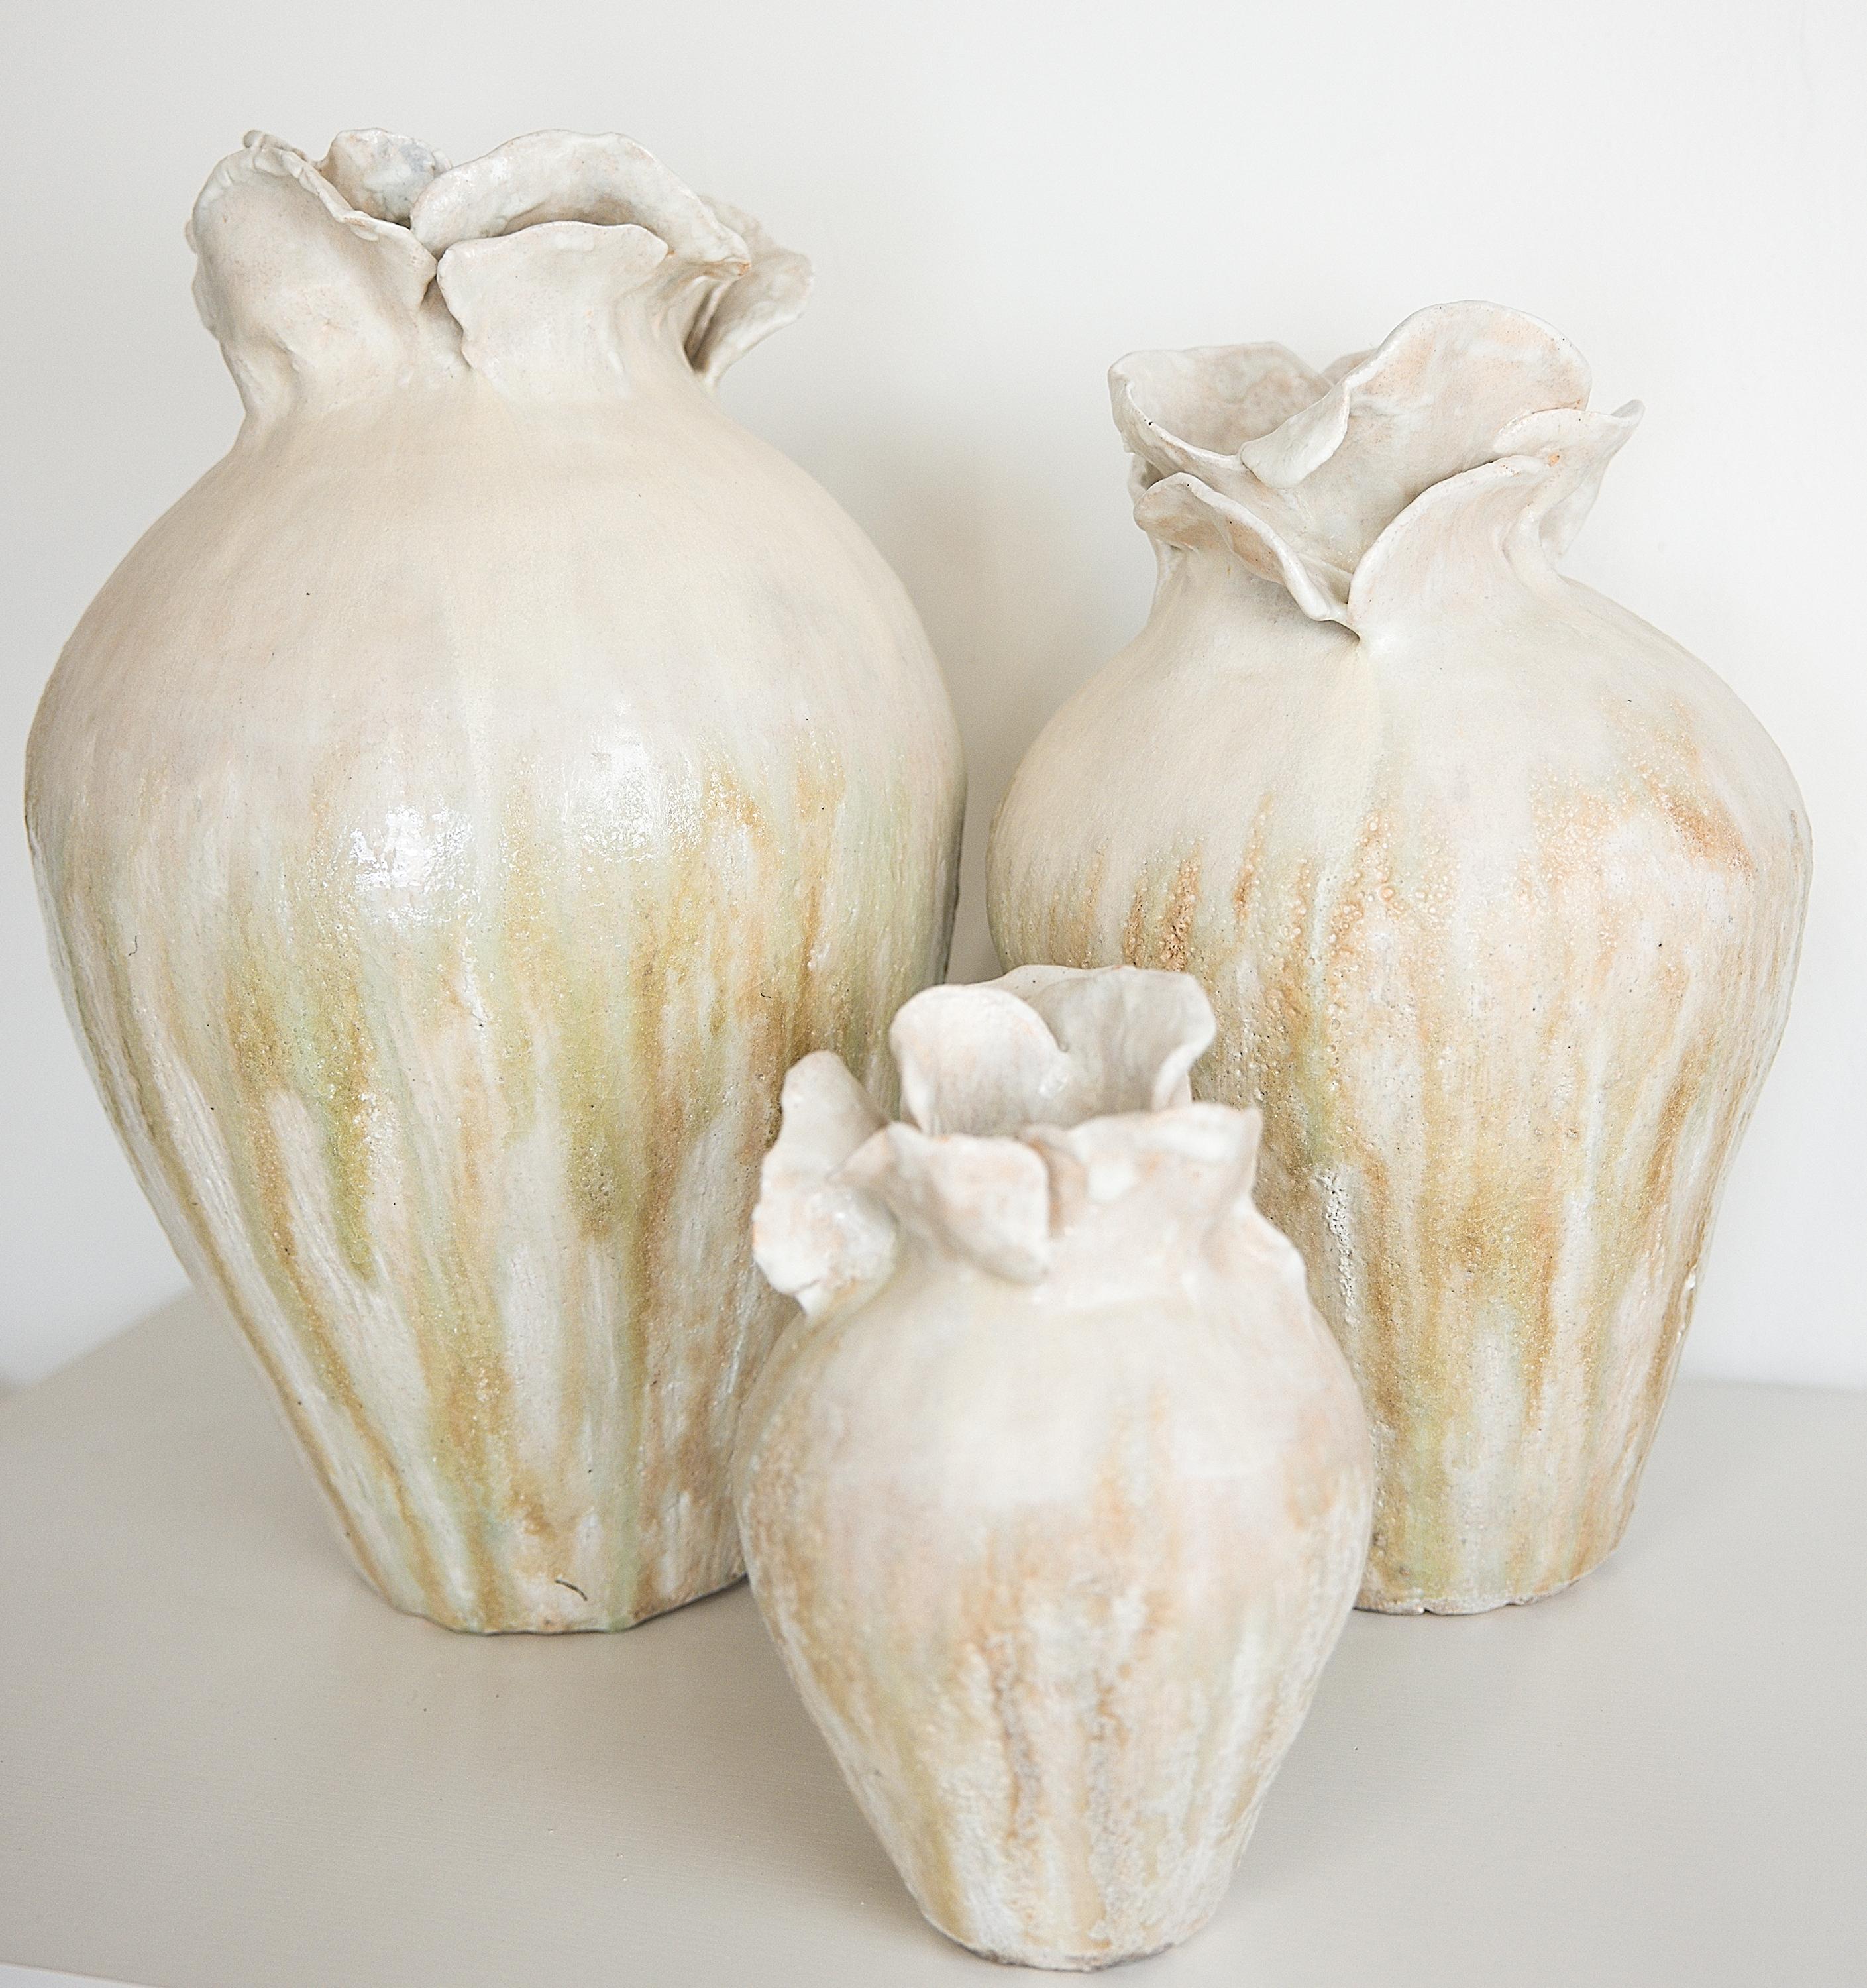 Bring a touch of modern style to your home with our Yeonhwa Jars. ( Lotus Flower Jars)
. Part of our permanent collection, each striking vase features a unique, moon-like design in an eye-catching light lava glaze.
Please select your size, Each one